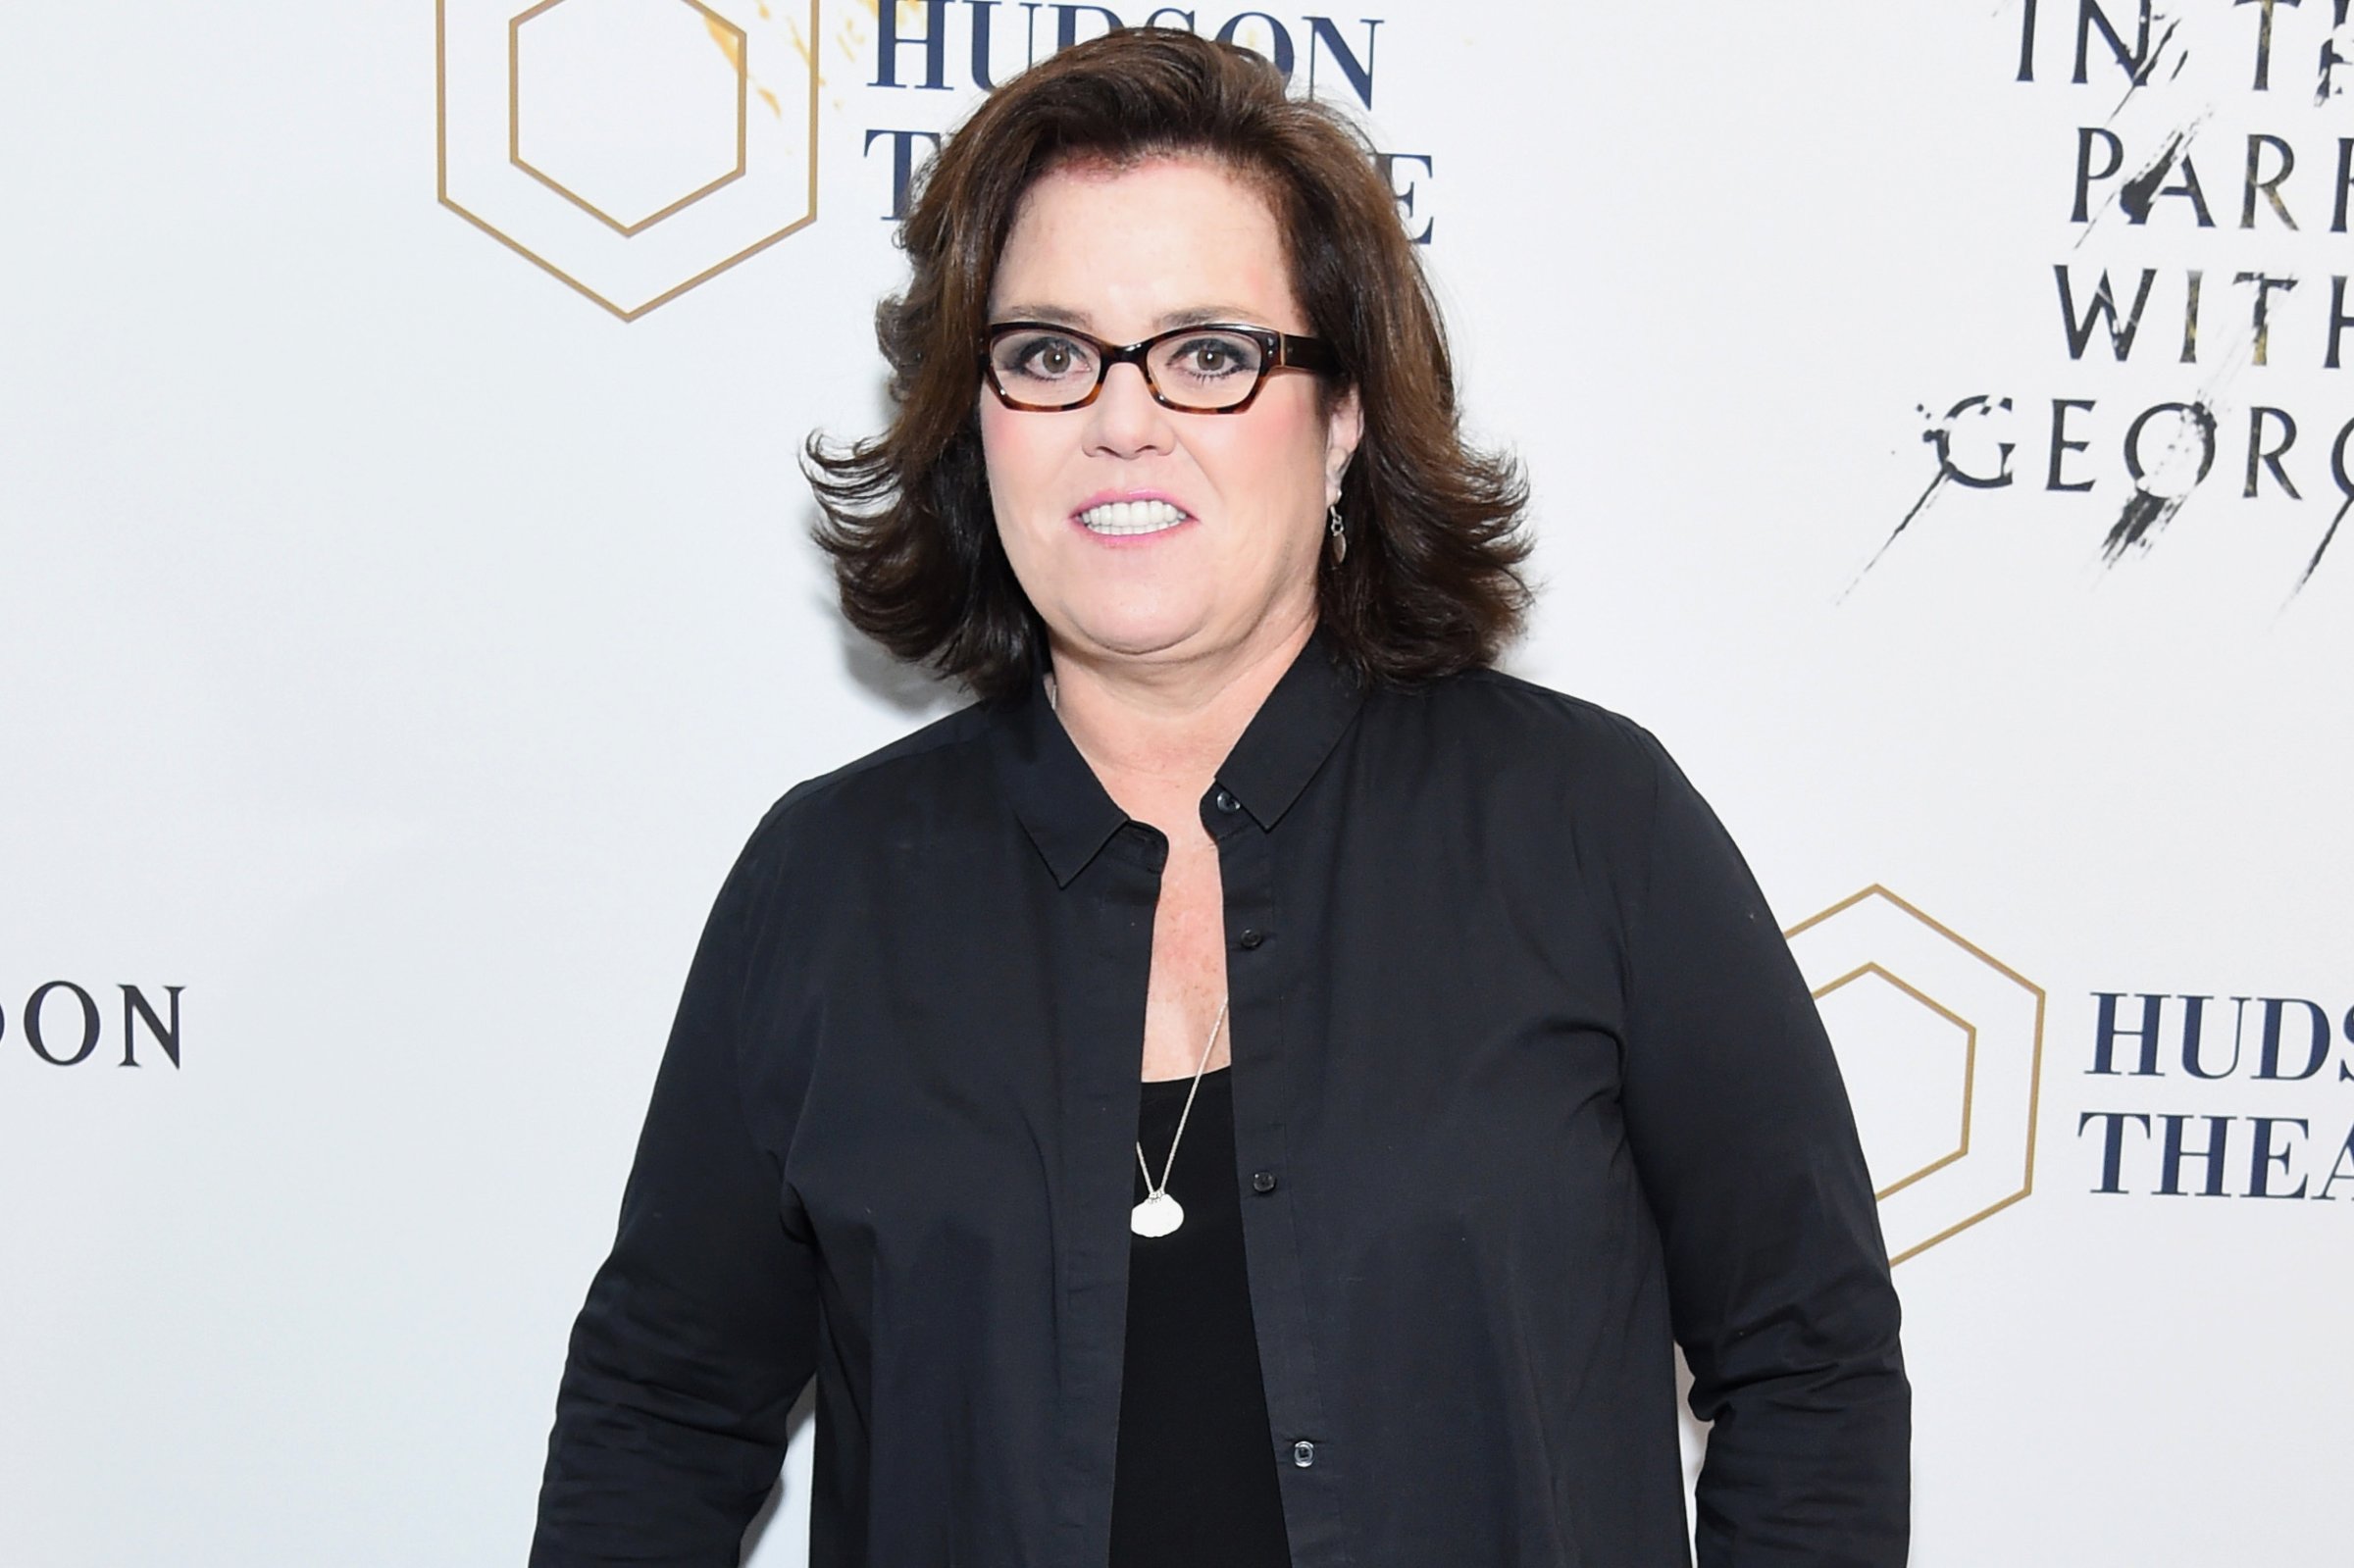 Rosie O'Donnell, on Feb. 23, 2017 in New York City.